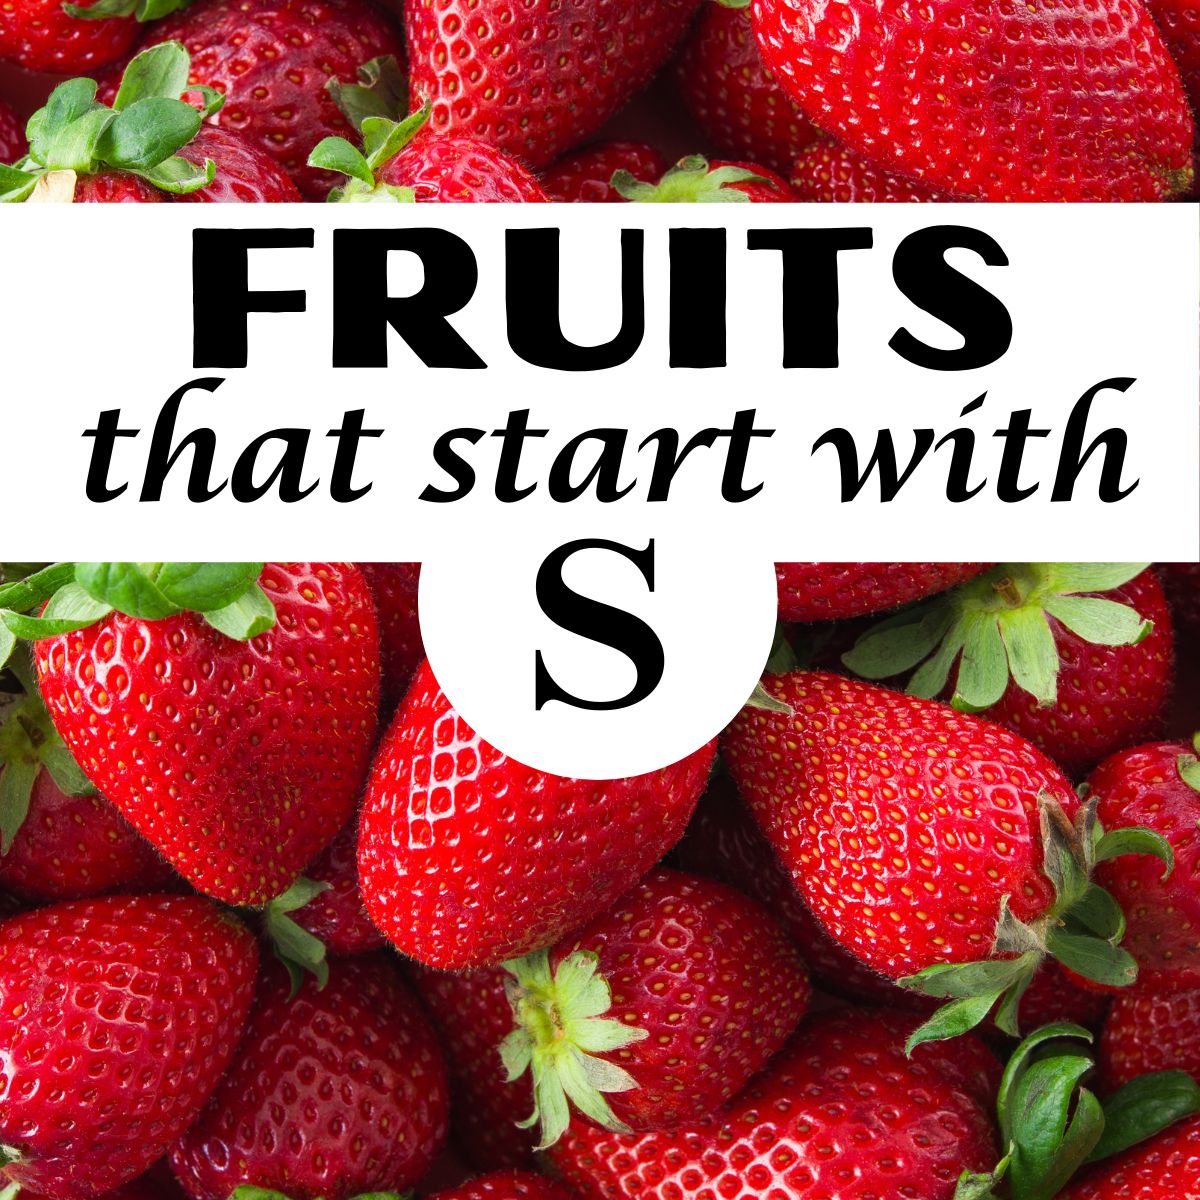 Close up of strawberries, with the title "fruits that start with S."